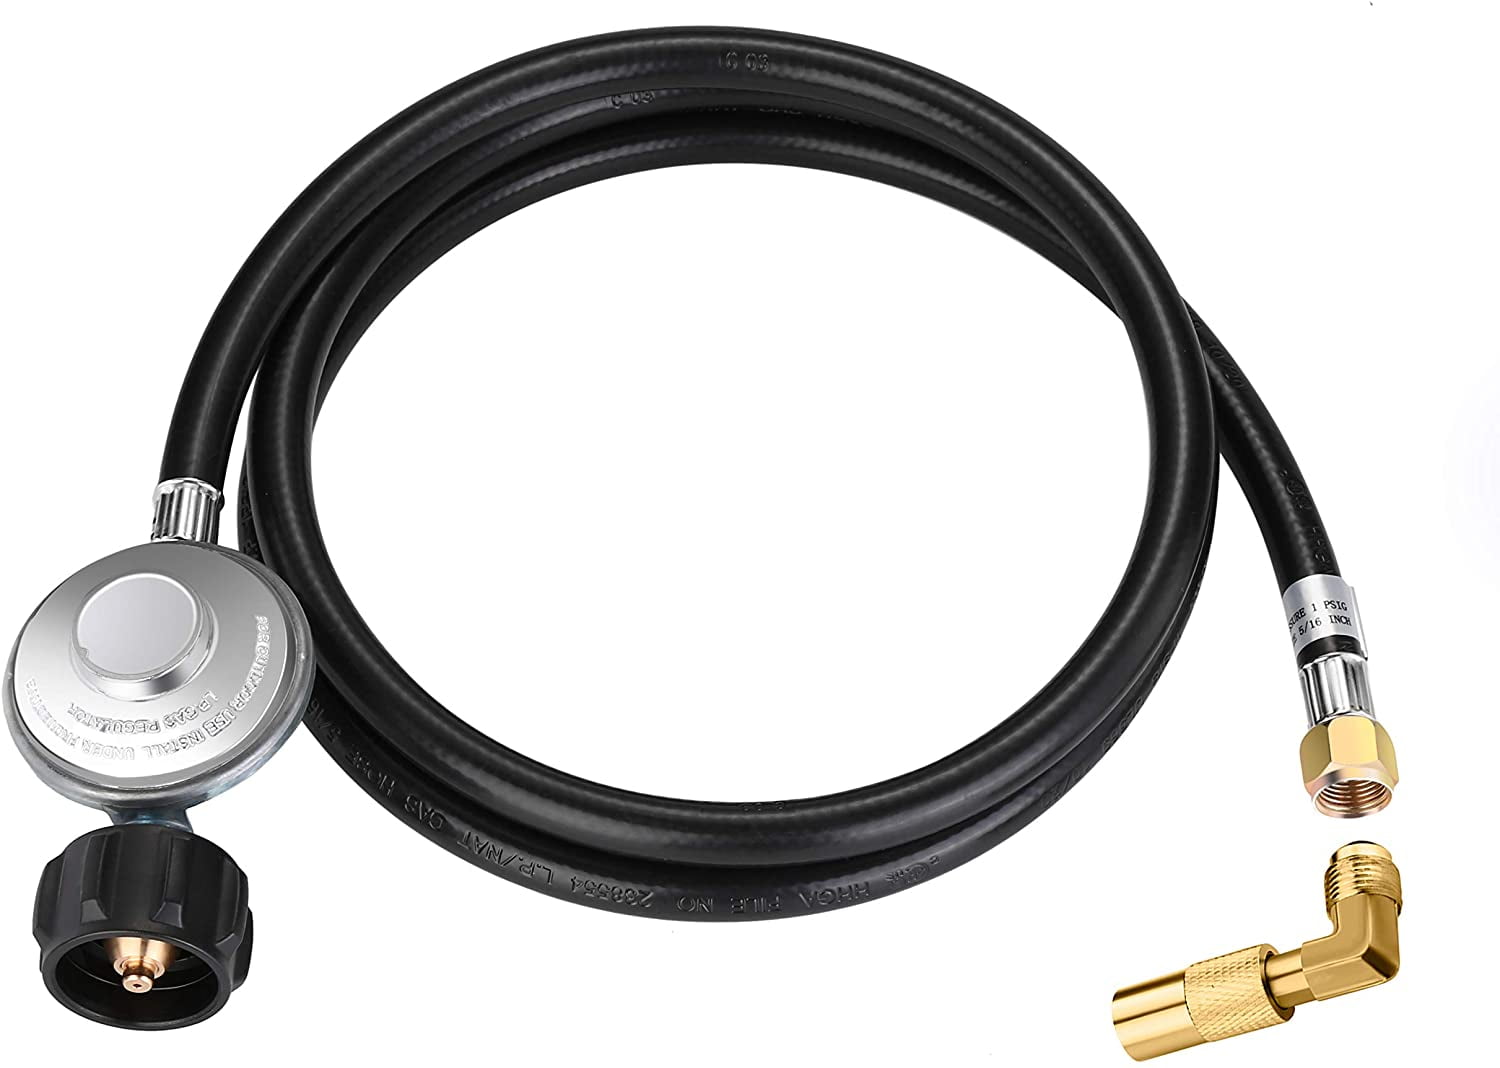 Blackstone Grill Propane Adapter 3/8" Male Flare Elbow to Connect Extension Hose 